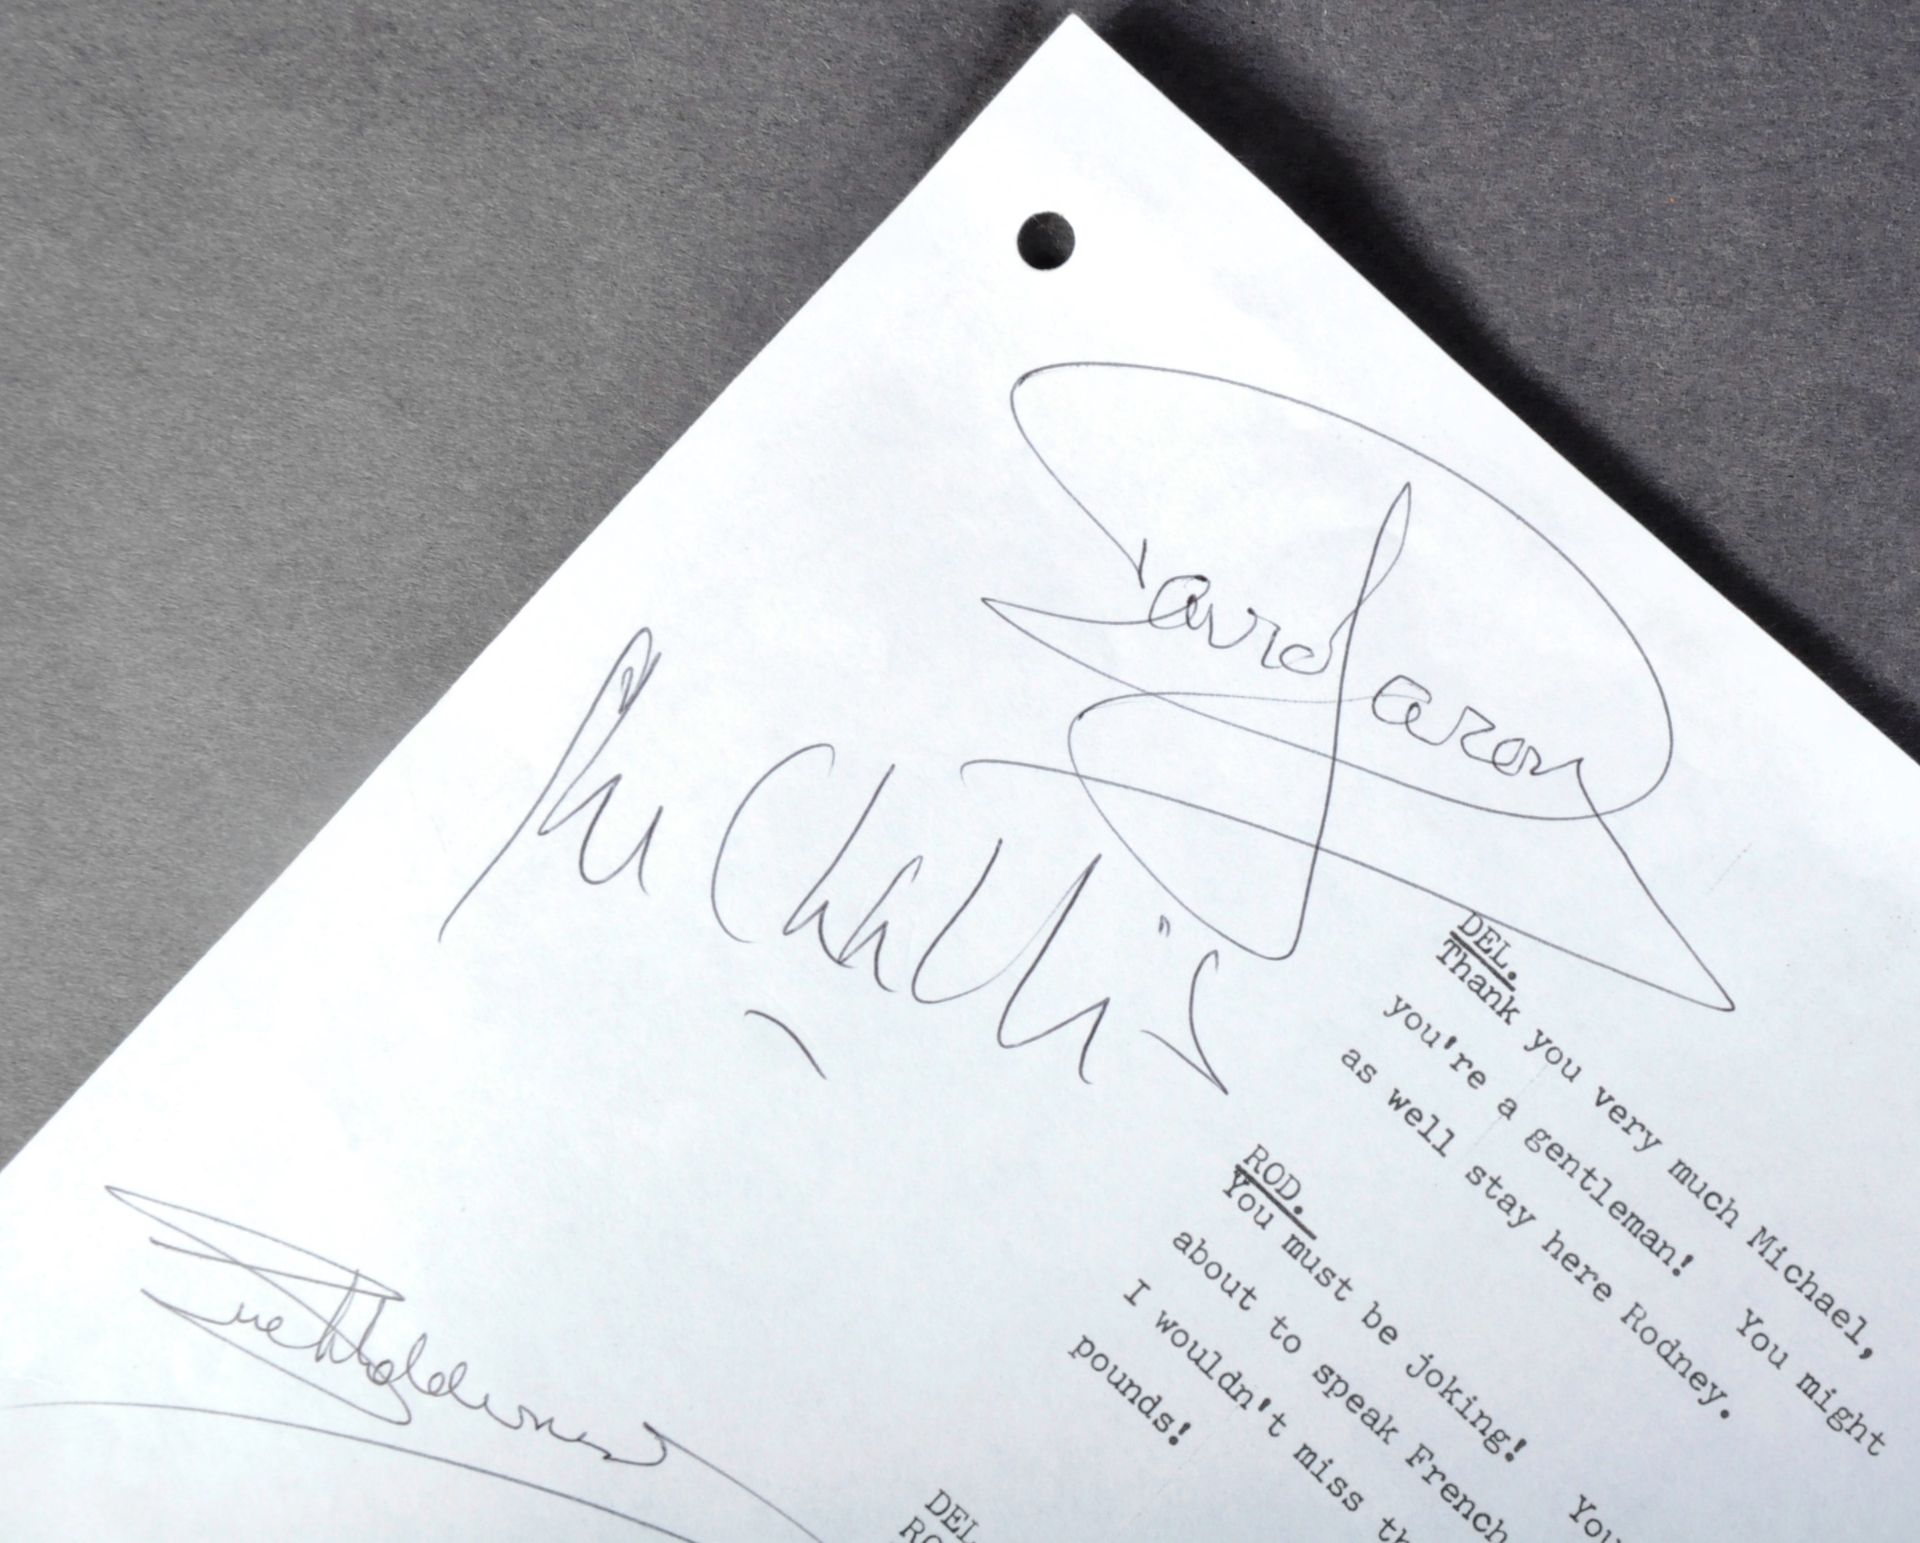 ONLY FOOLS & HORSES - MULTI-SIGNED SCRIPT PAGE - PRUSSIA WITH LOVE - Image 2 of 2